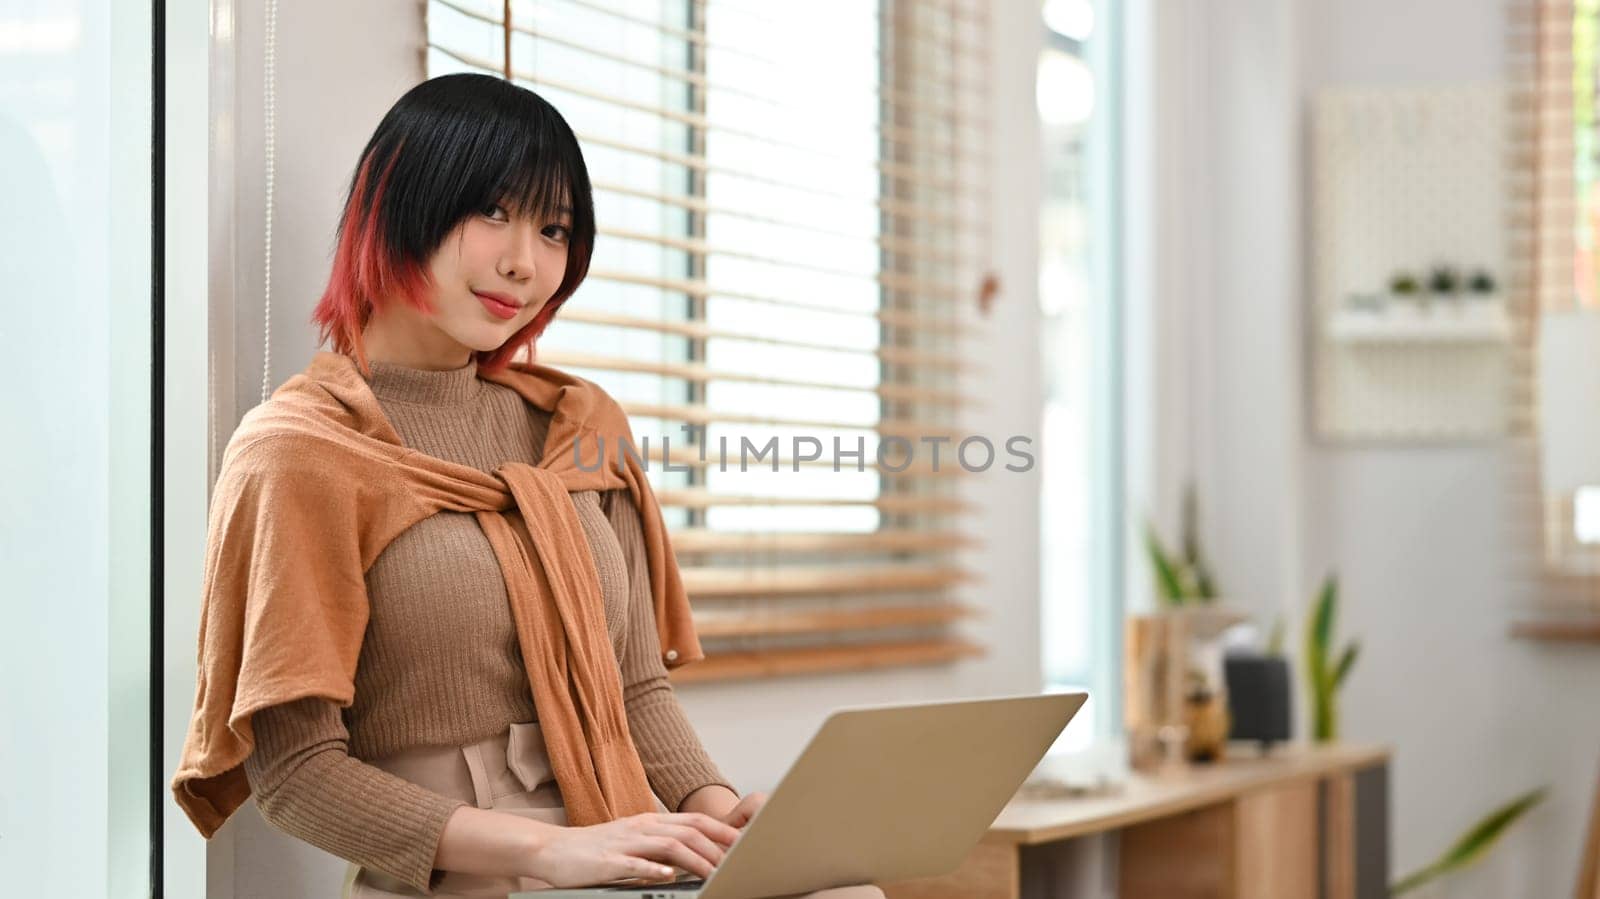 Portrait of pretty asian woman in stylish outfit using laptop at home office. Freelance, creative occupation, e-learning concept.